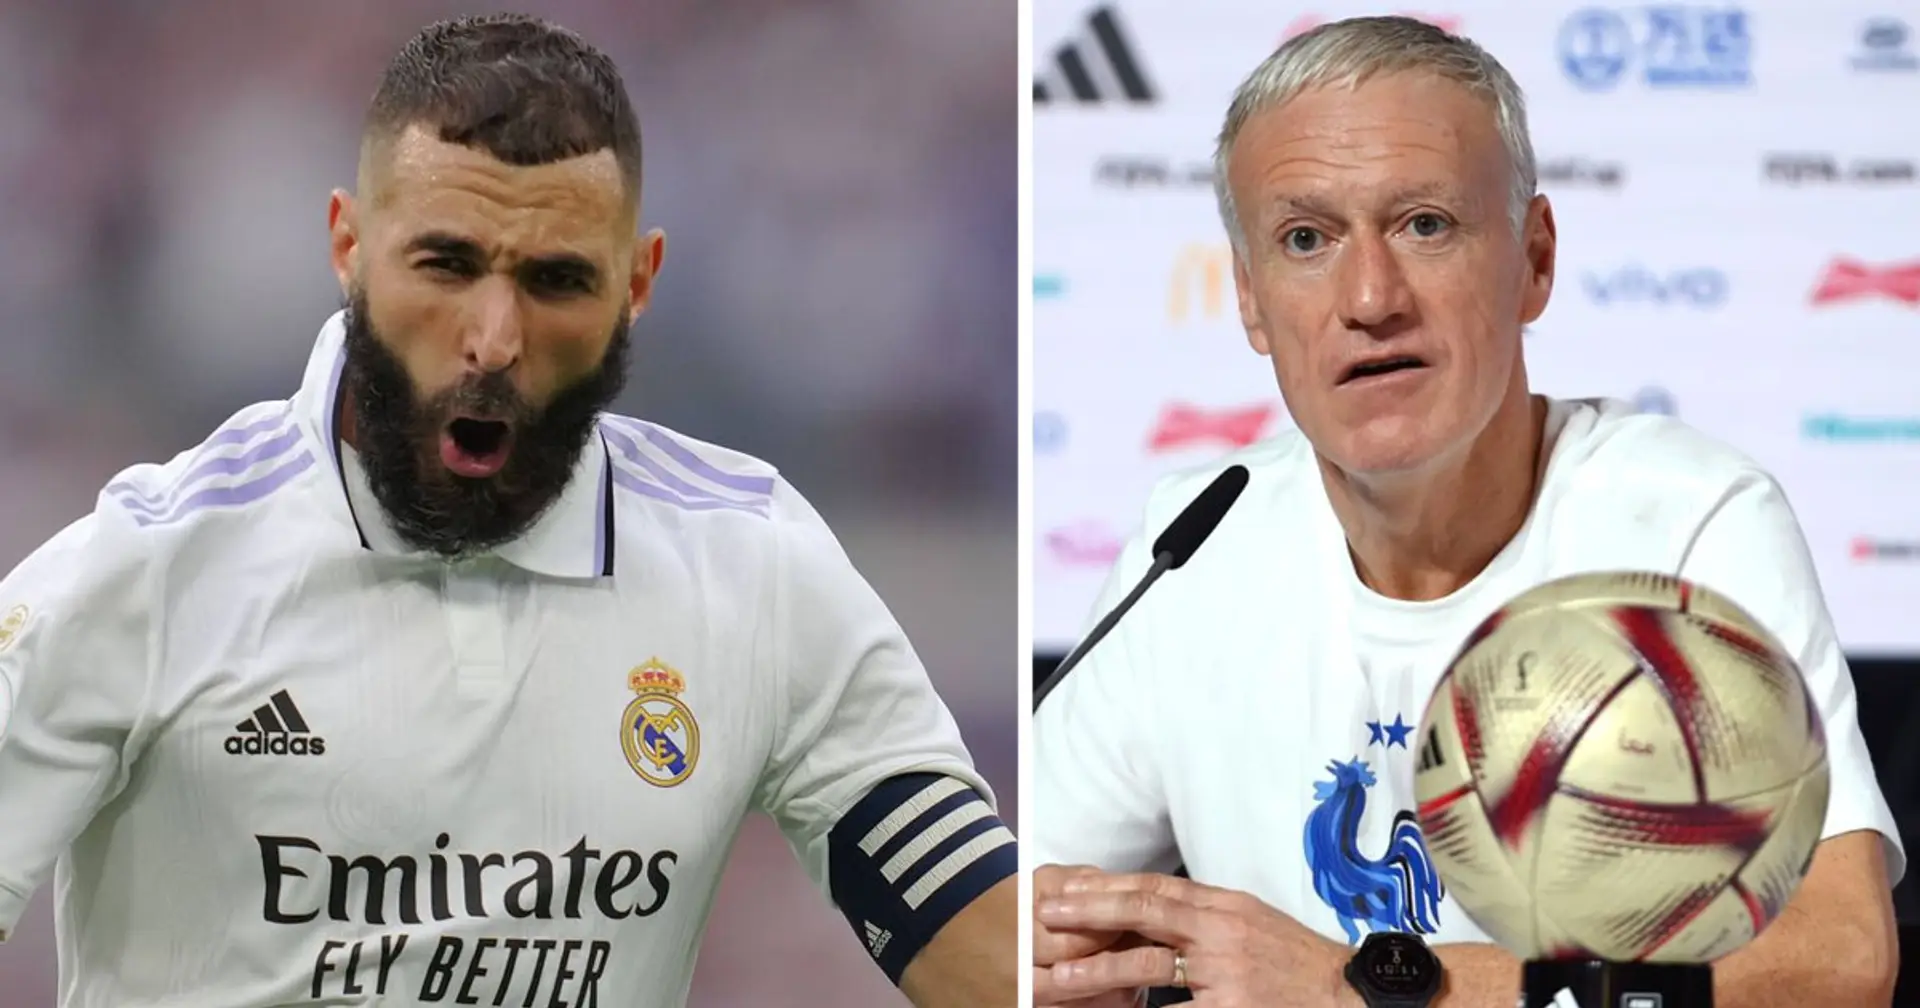 Benzema 'wants his revenge' - 2 reasons why Karim is ultra-motivated as Madrid set to resume season